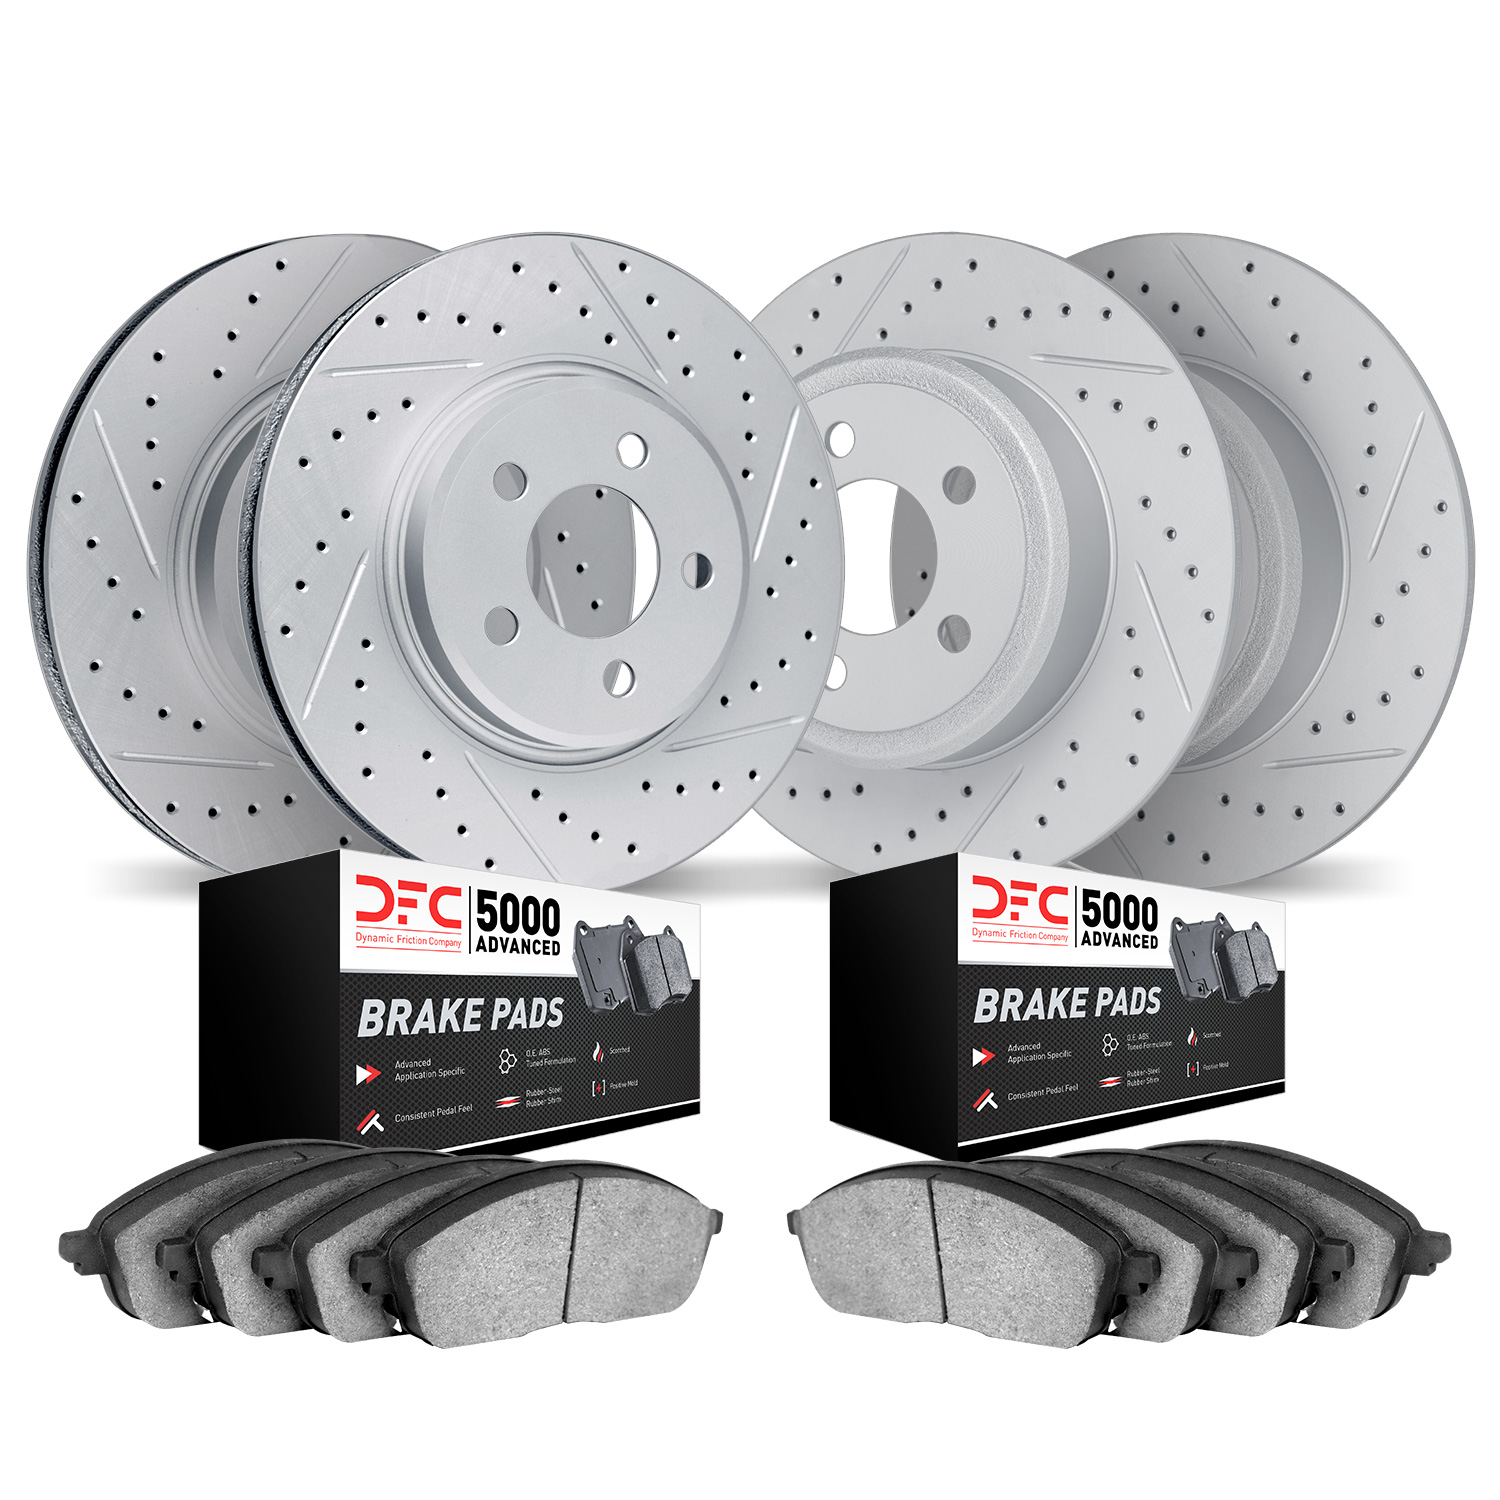 2504-76083 Geoperformance Drilled/Slotted Rotors w/5000 Advanced Brake Pads Kit, 2000-2003 Lexus/Toyota/Scion, Position: Front a